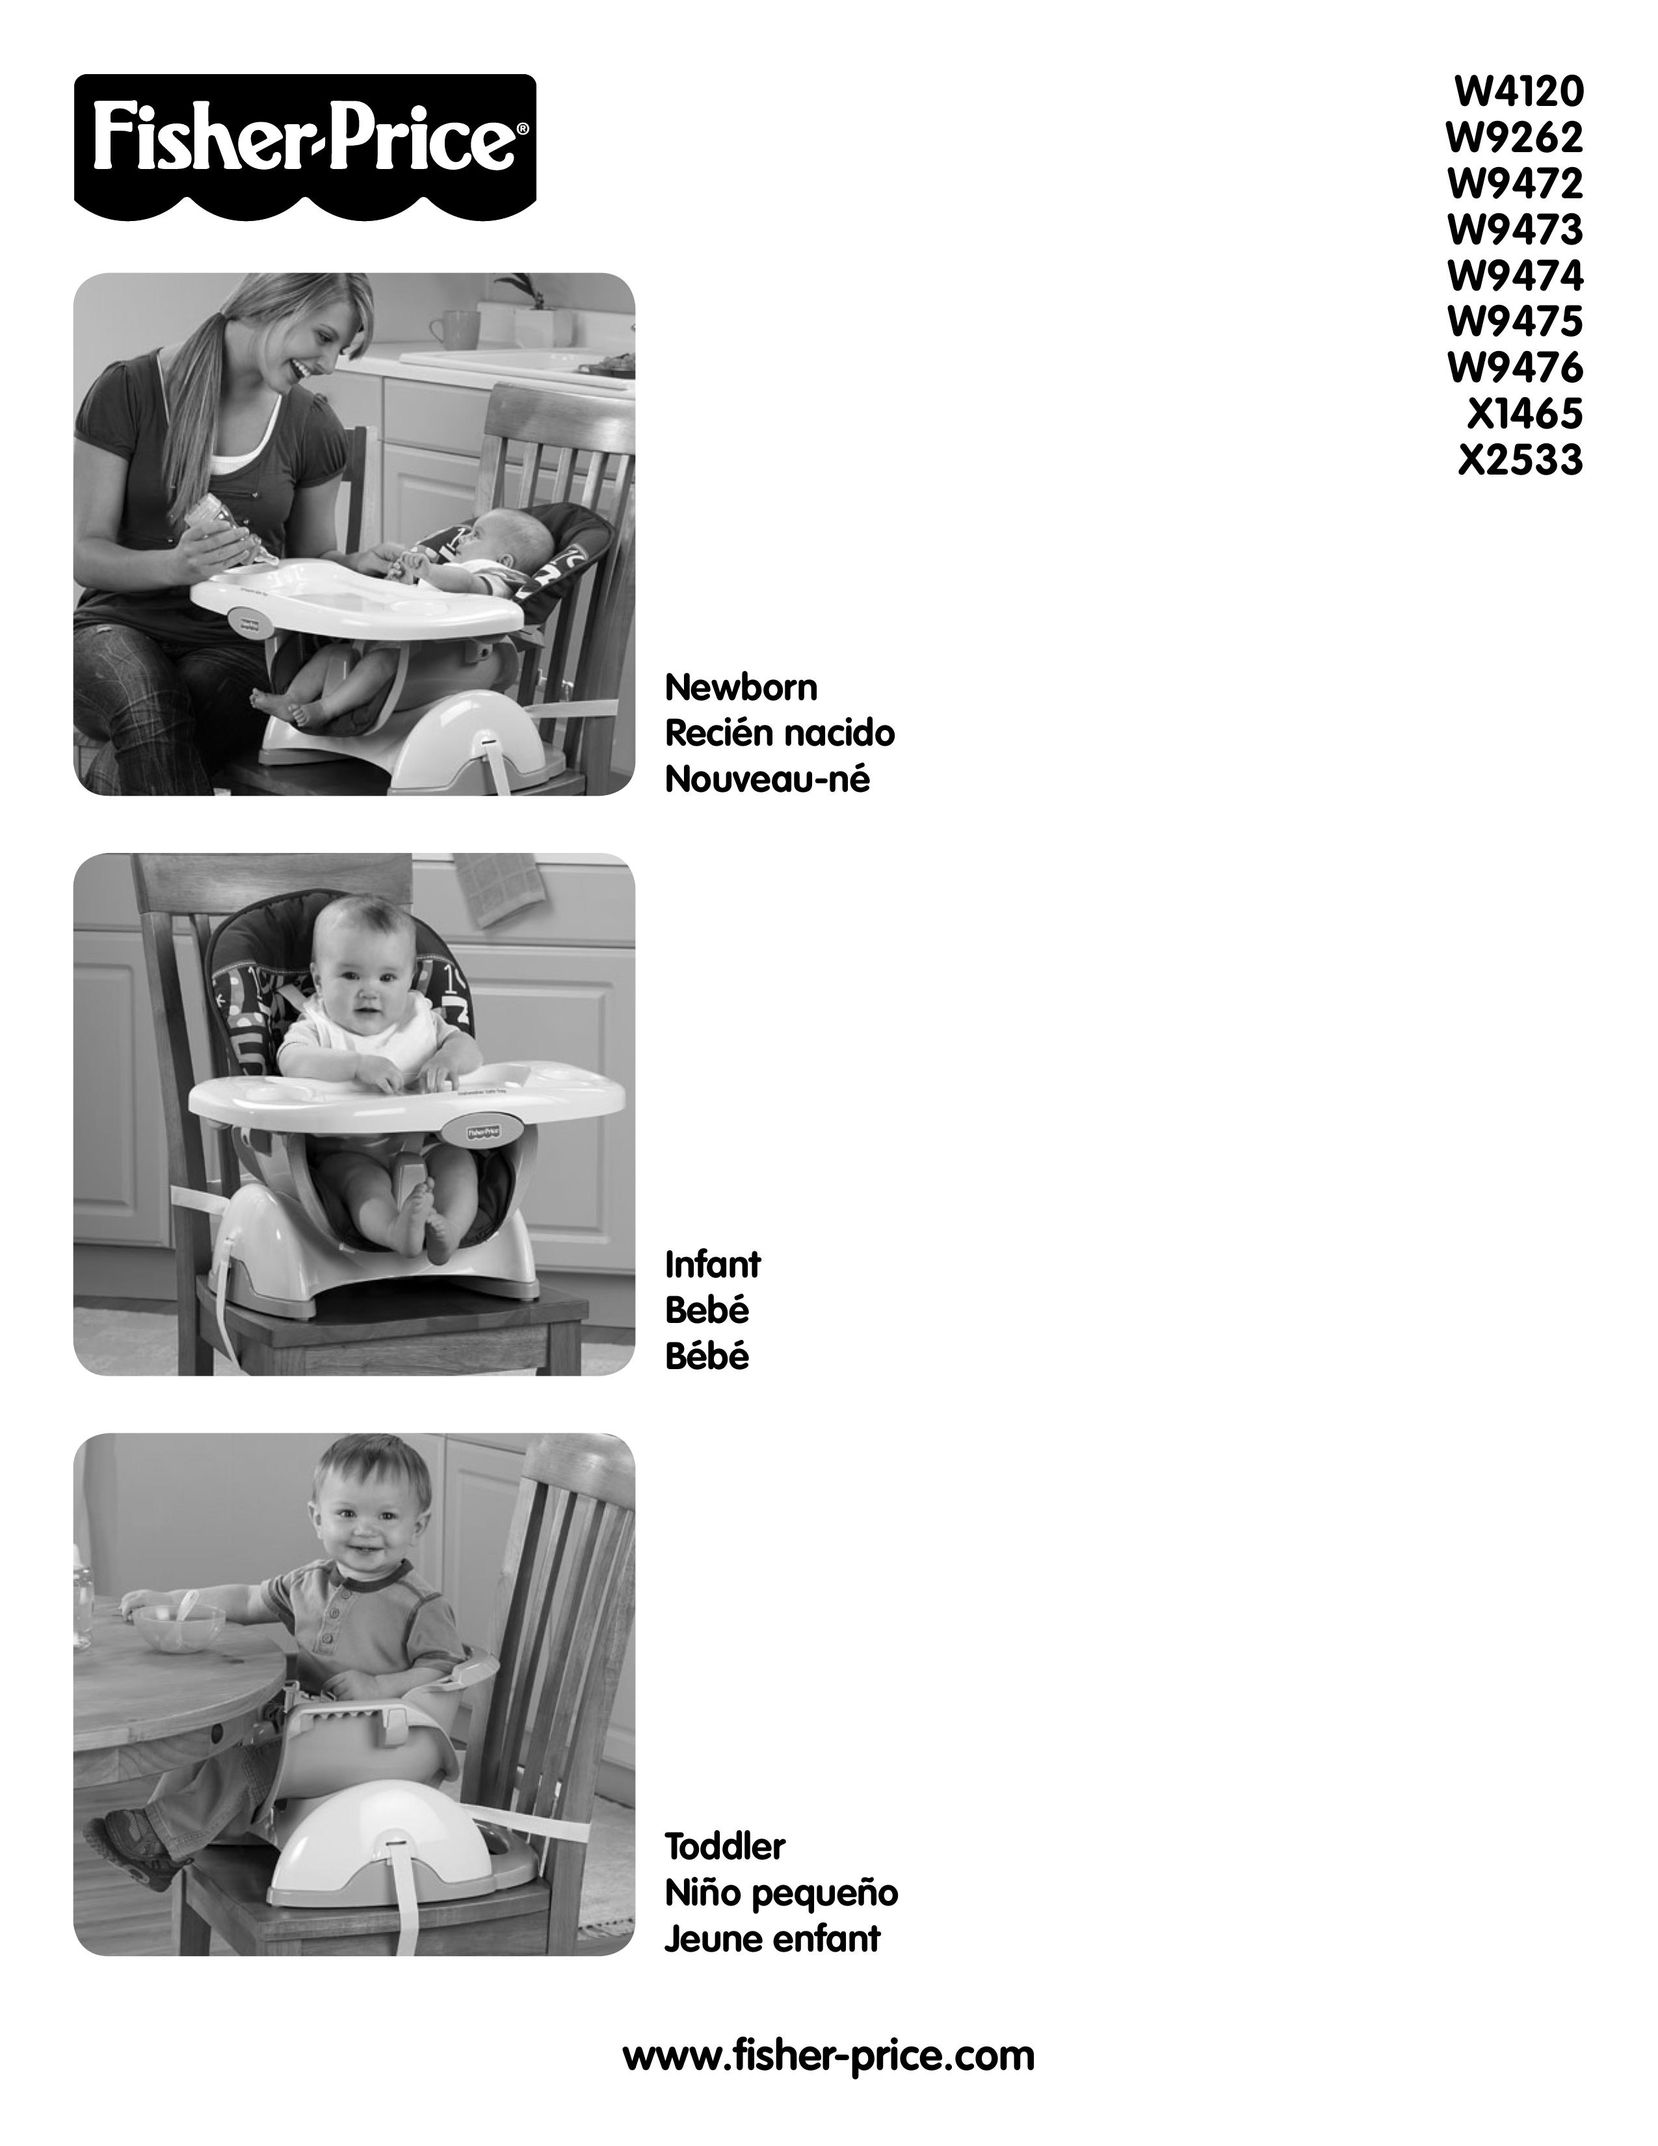 Fisher-Price W9475 High Chair User Manual